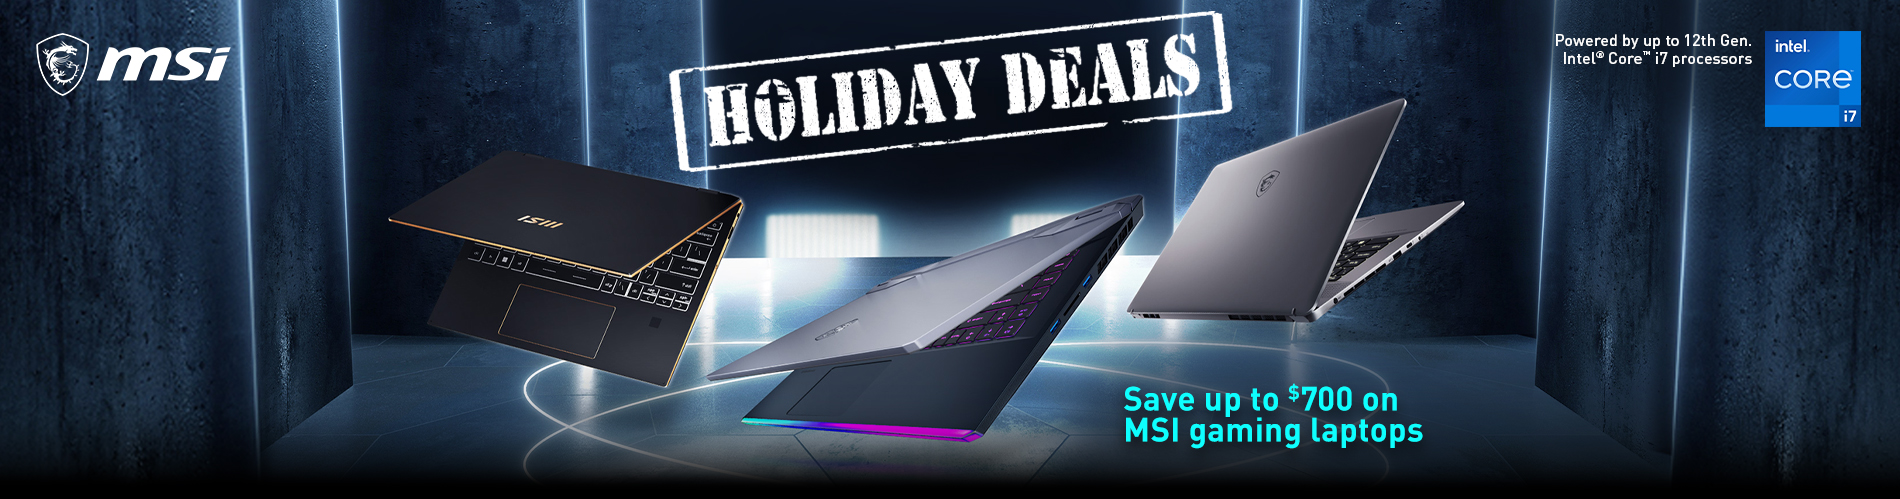 Msi Notebooks Save450holidaydeal 11.11.22banner New